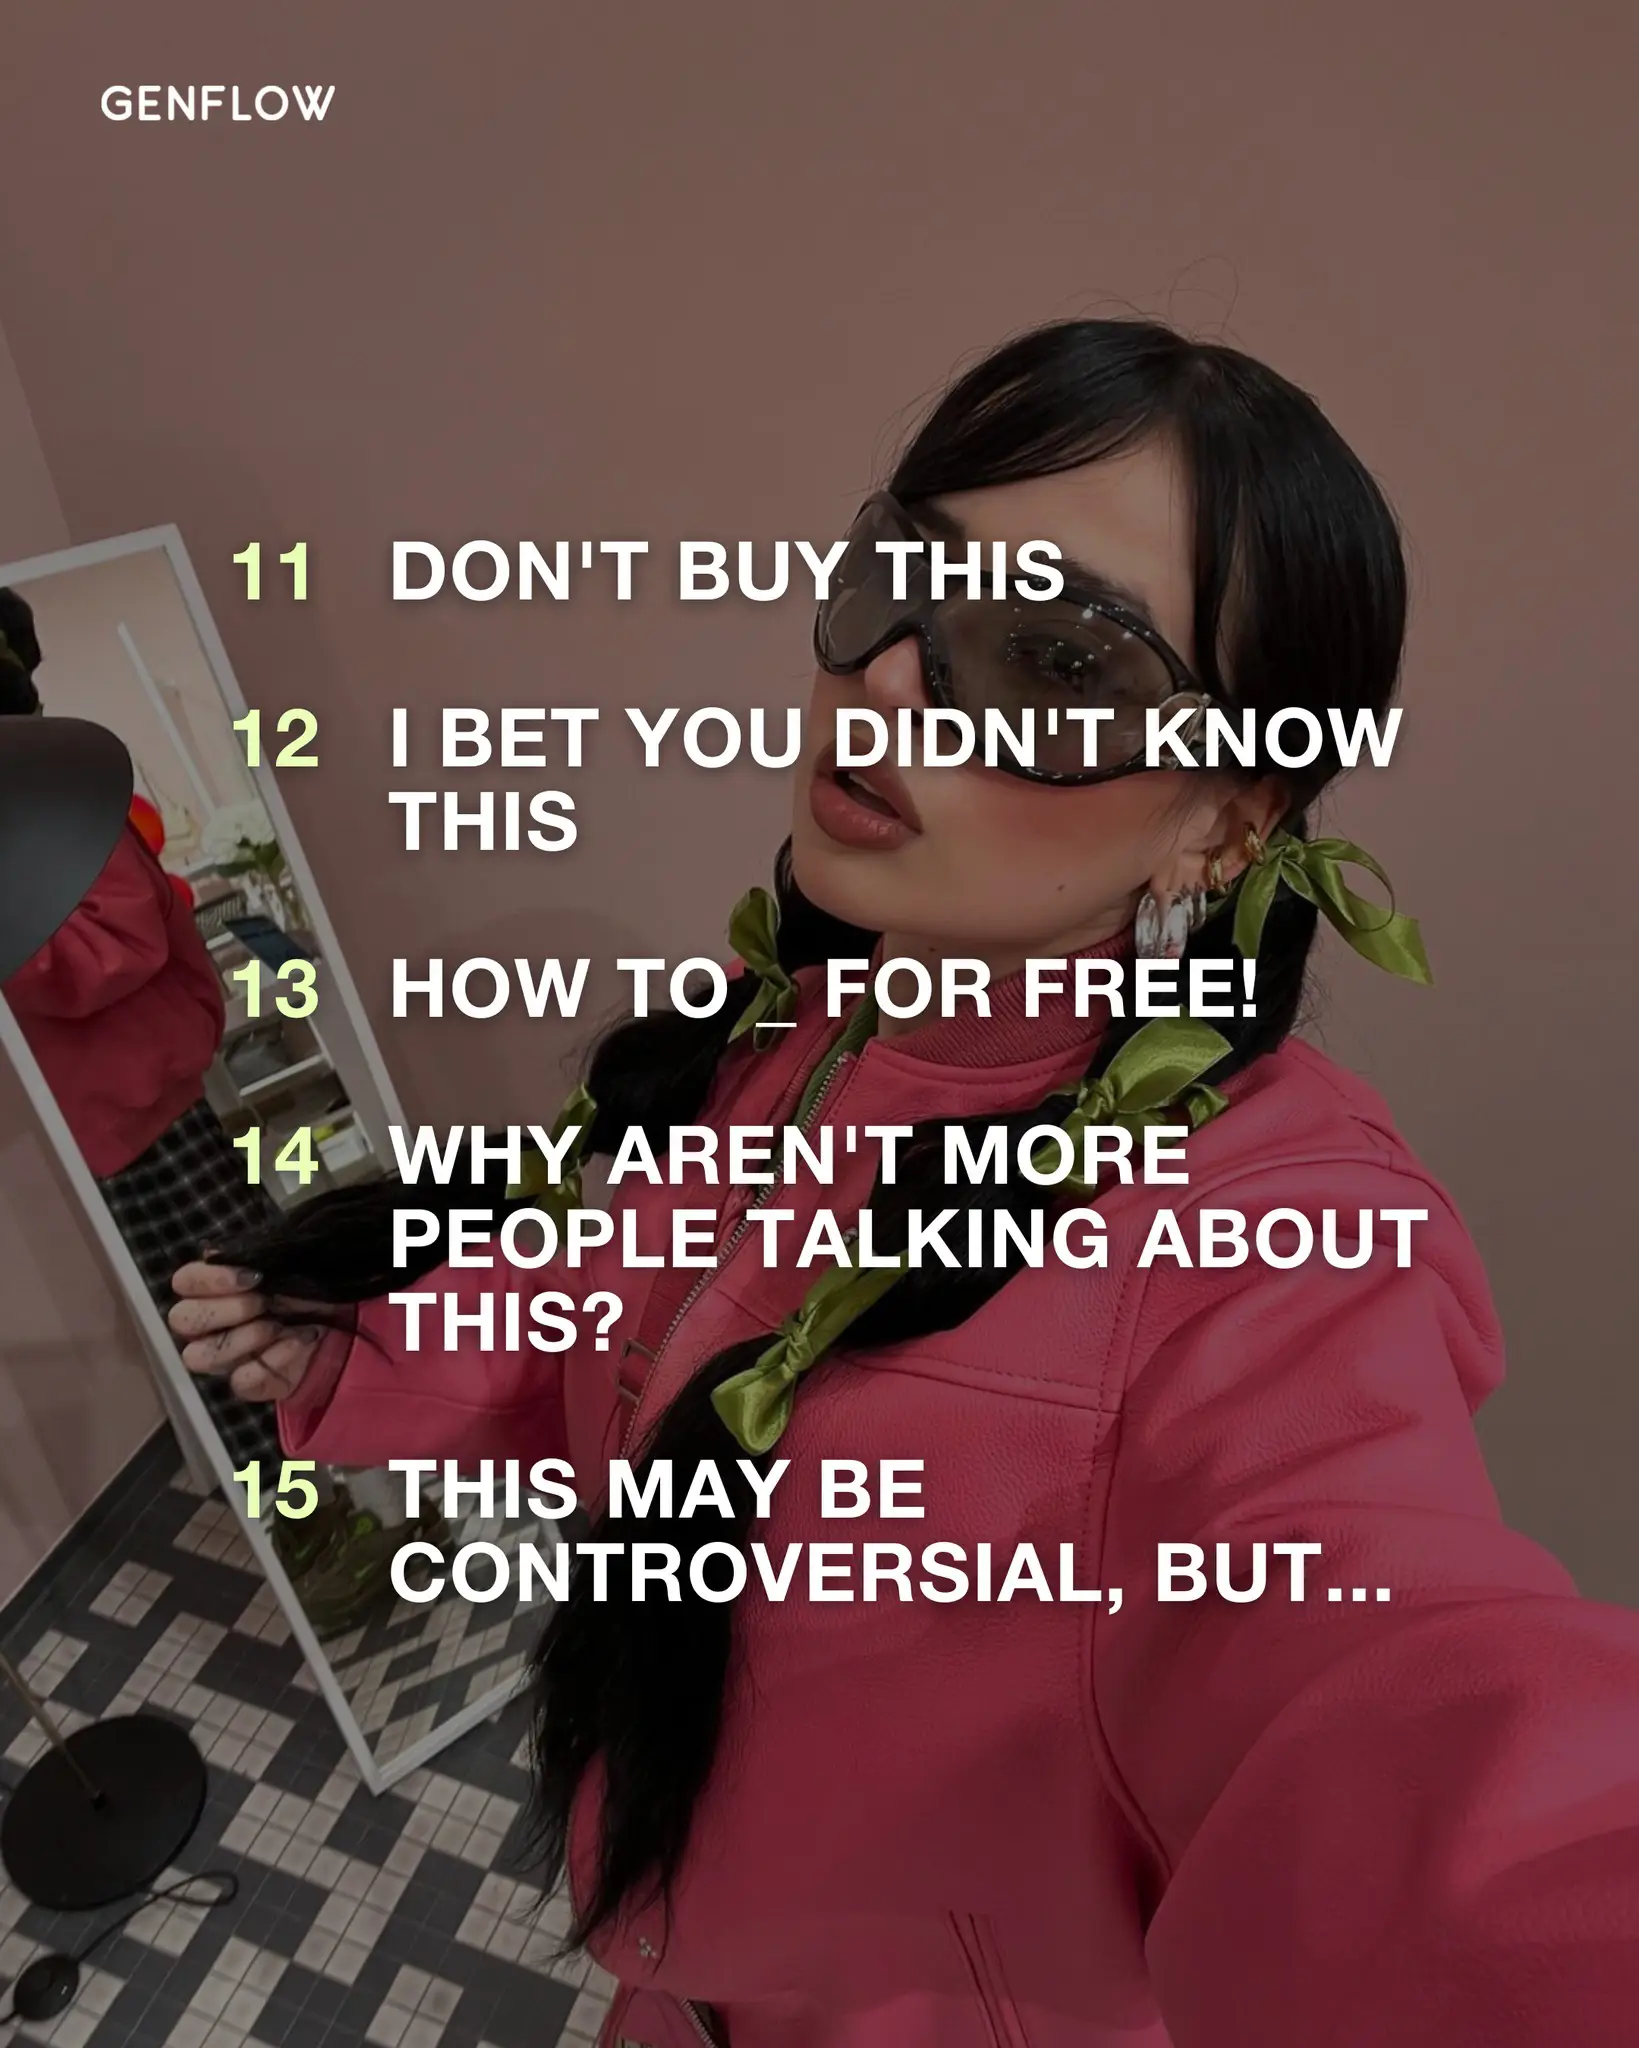  A woman wearing a pink jacket and sunglasses is standing in front of a mirror. The image is titled "Don't Buy This I bet you didn't know this" and is accompanied by a list of reasons.